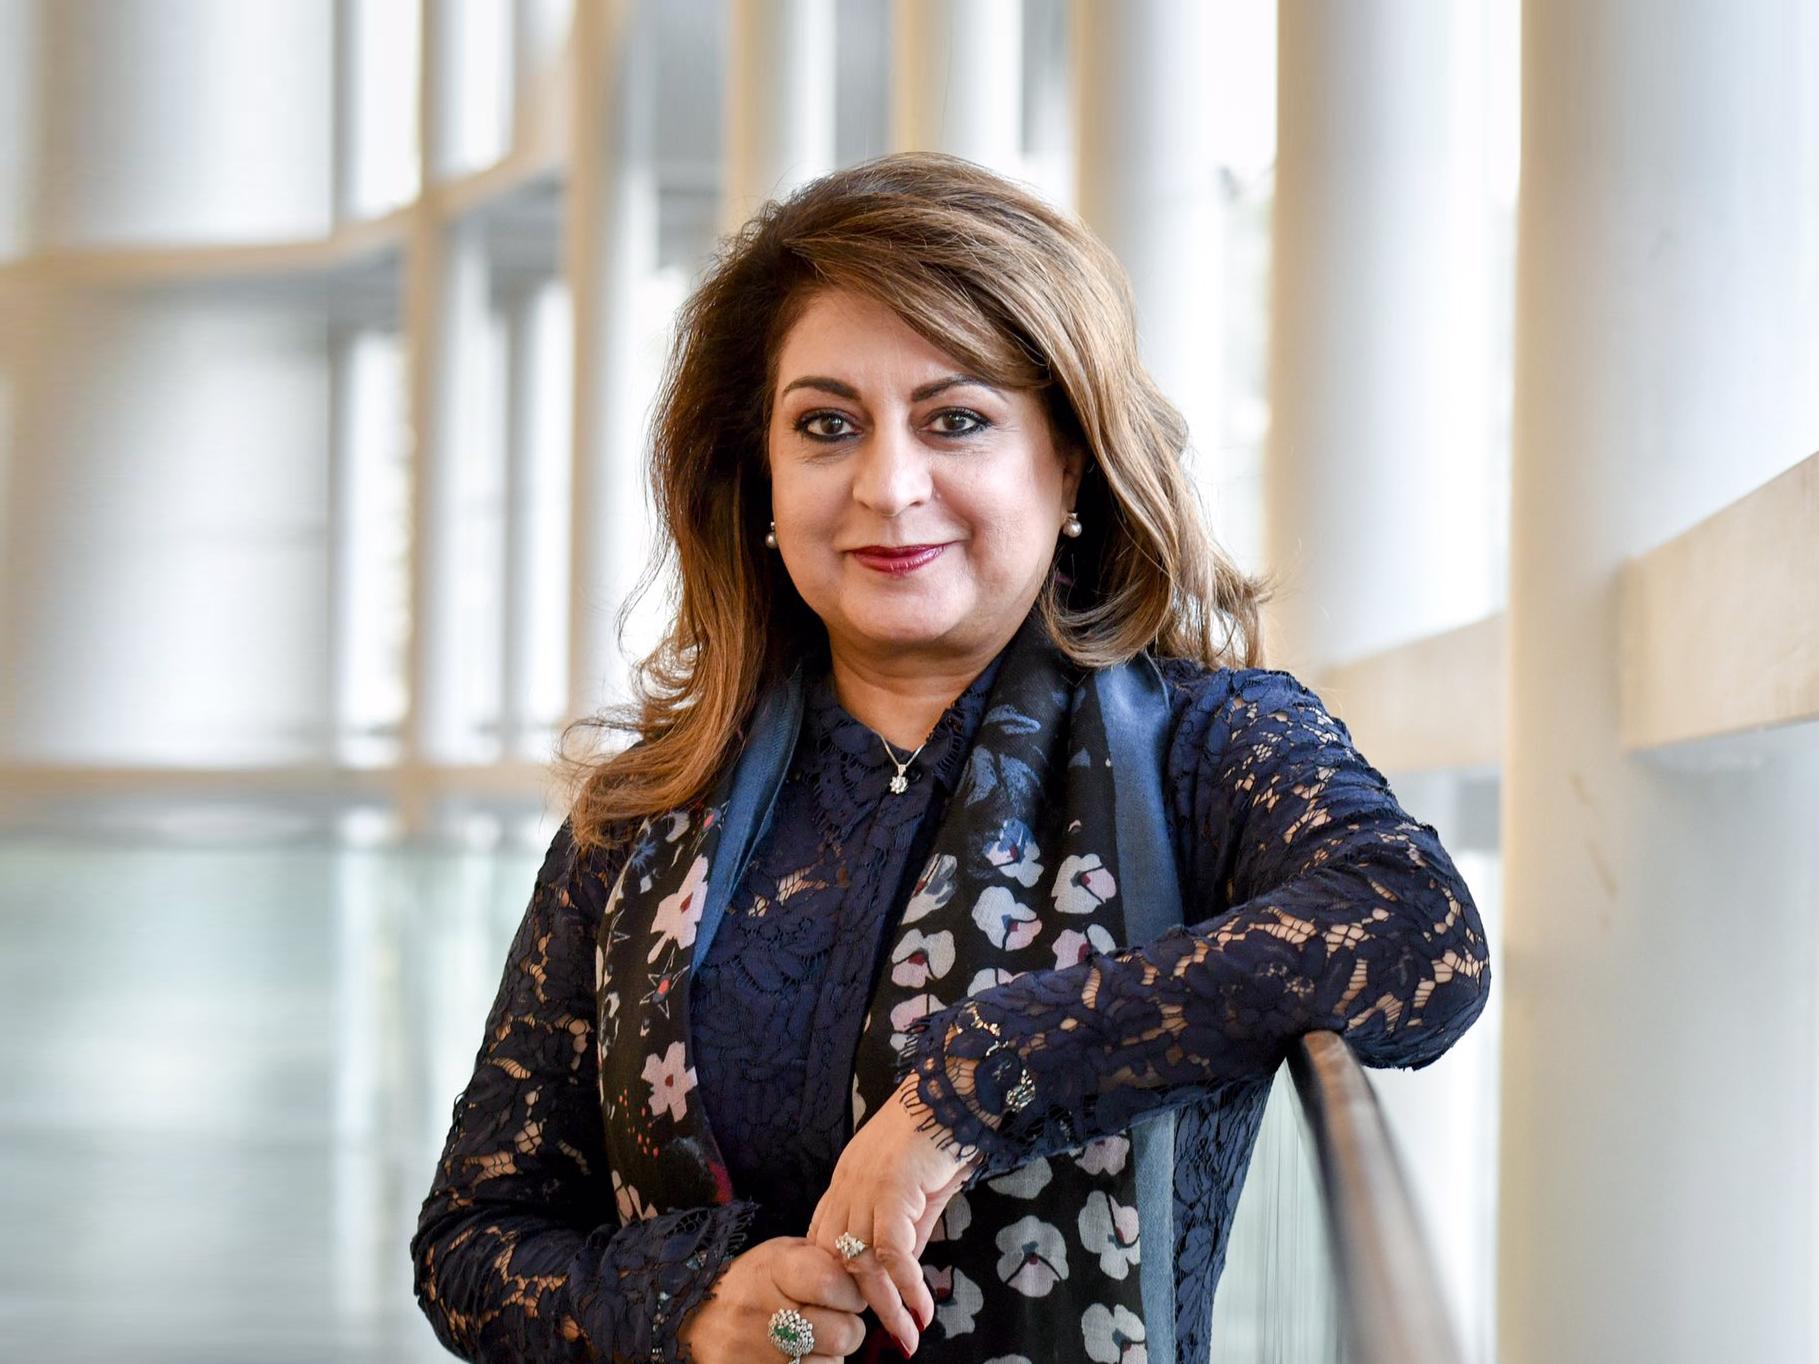 Nosheena Mobarik has championed business development and greater social cohesion within Scotland and internationally